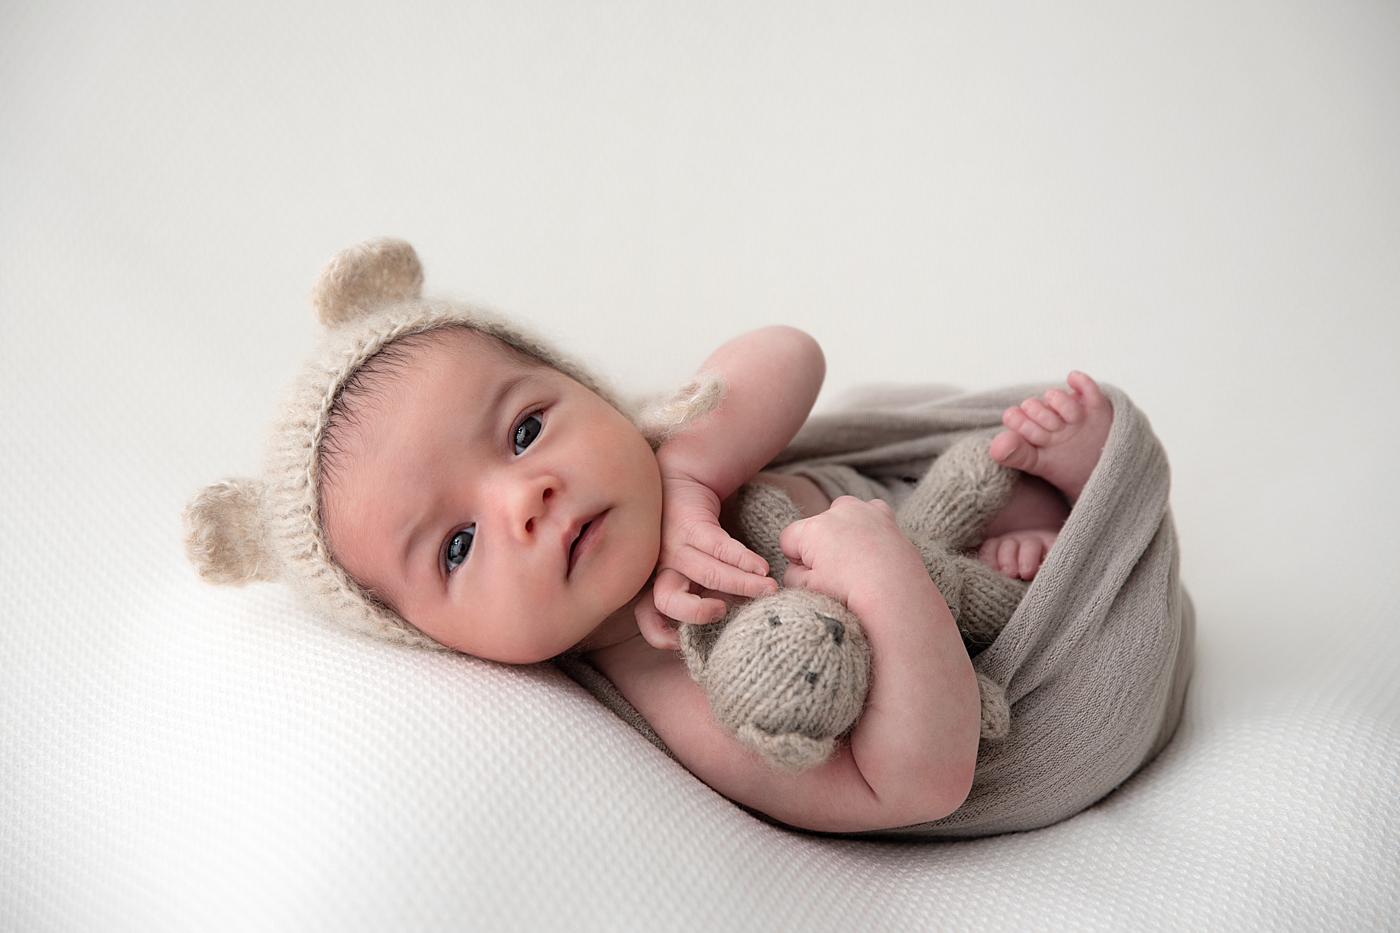 Baby boy newborn photos in studio in Chagrin Falls. Photo by Rachel Brookes Photography.